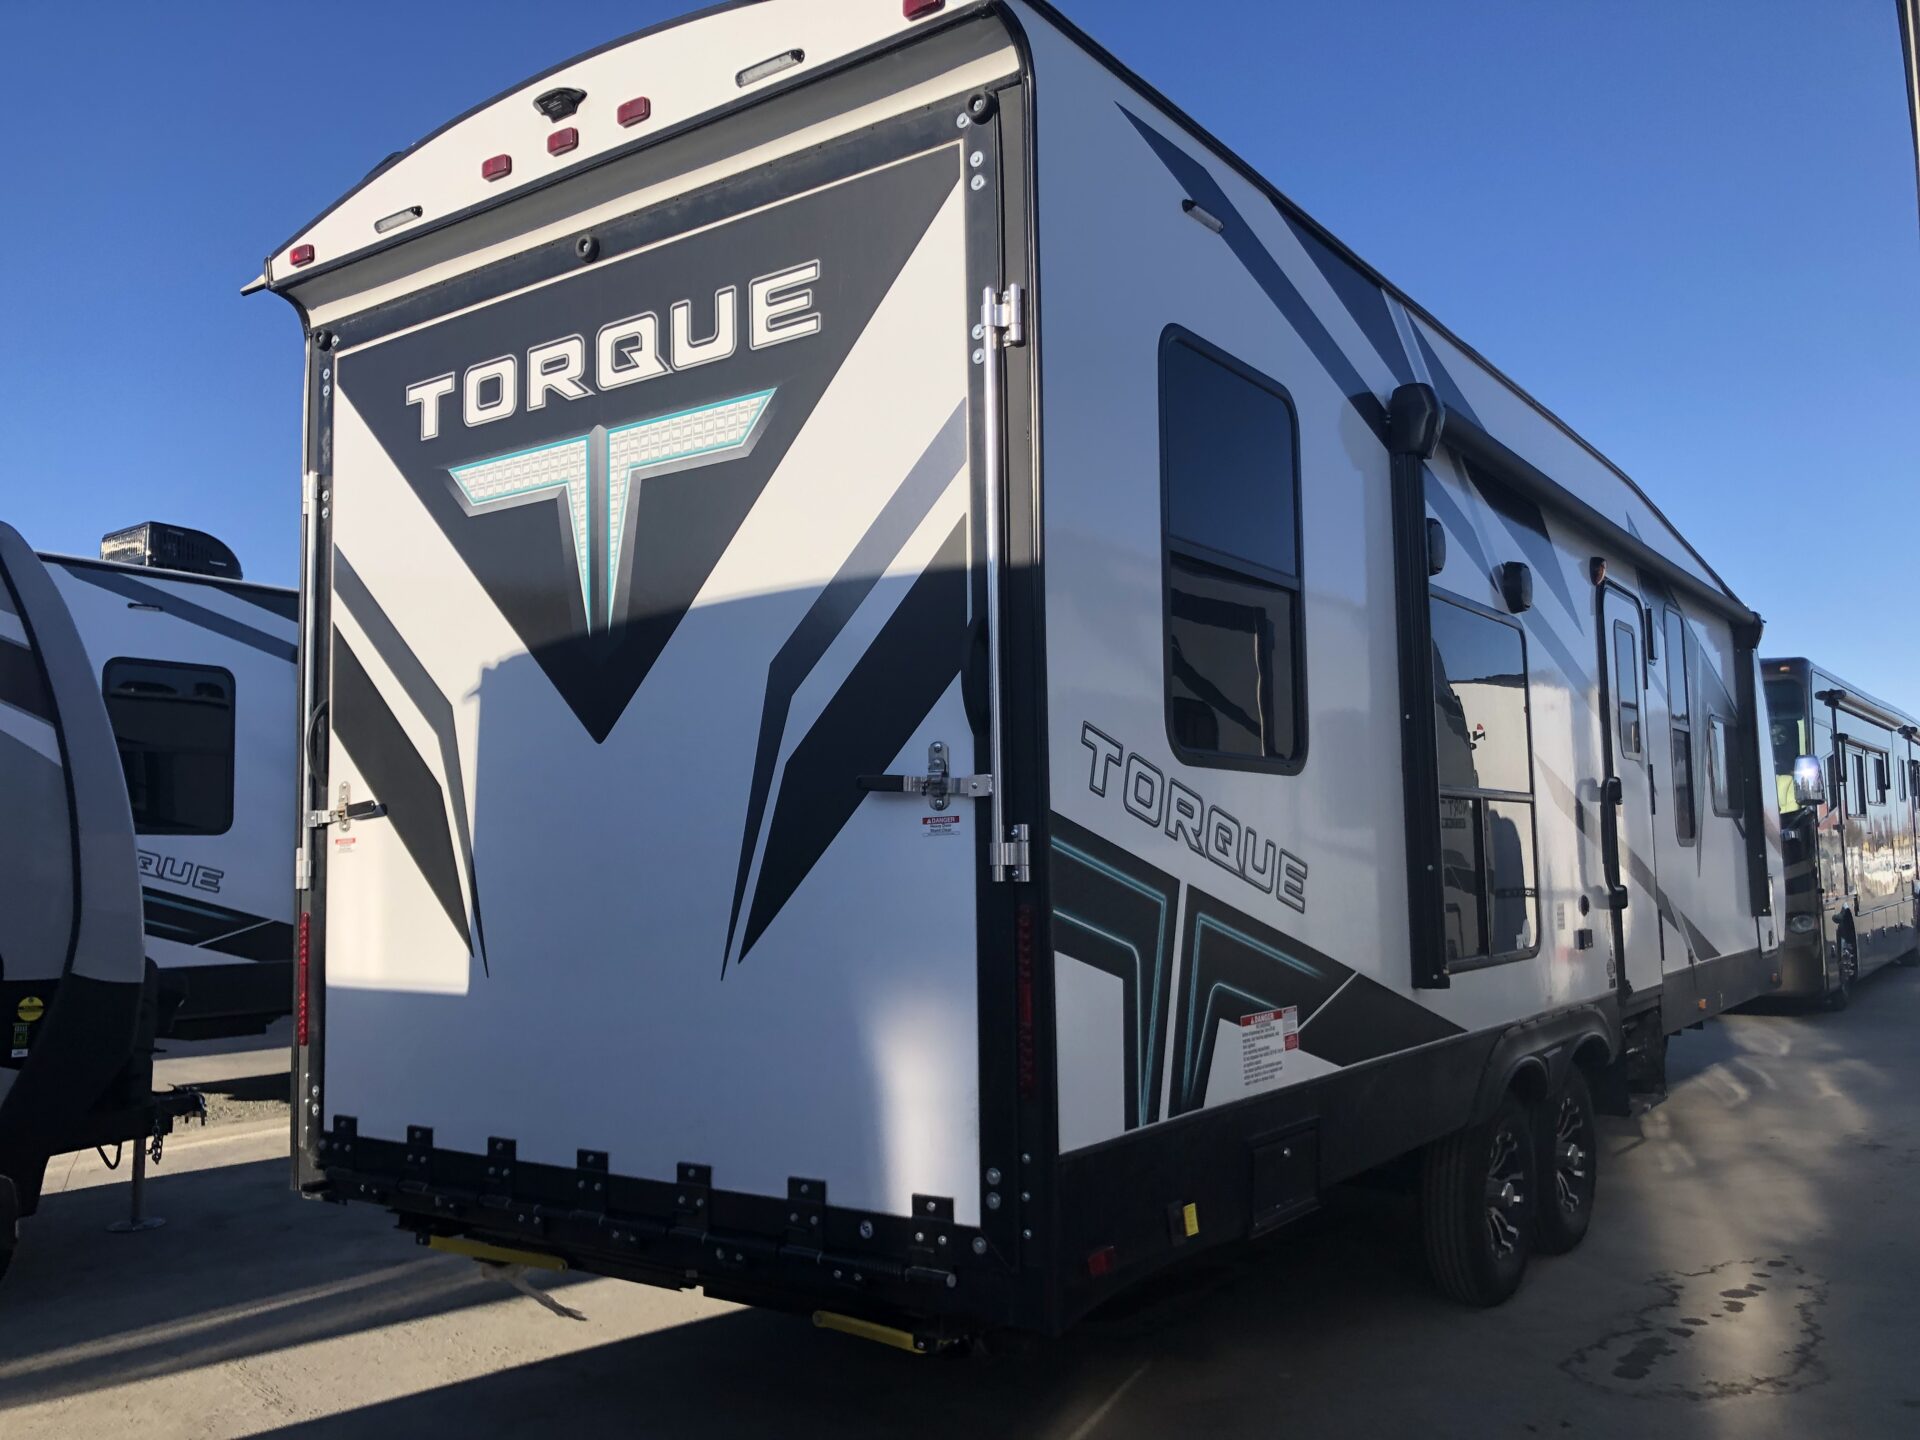 22 TORQUE 281 TRAVEL TRAILER TOY HAULER available